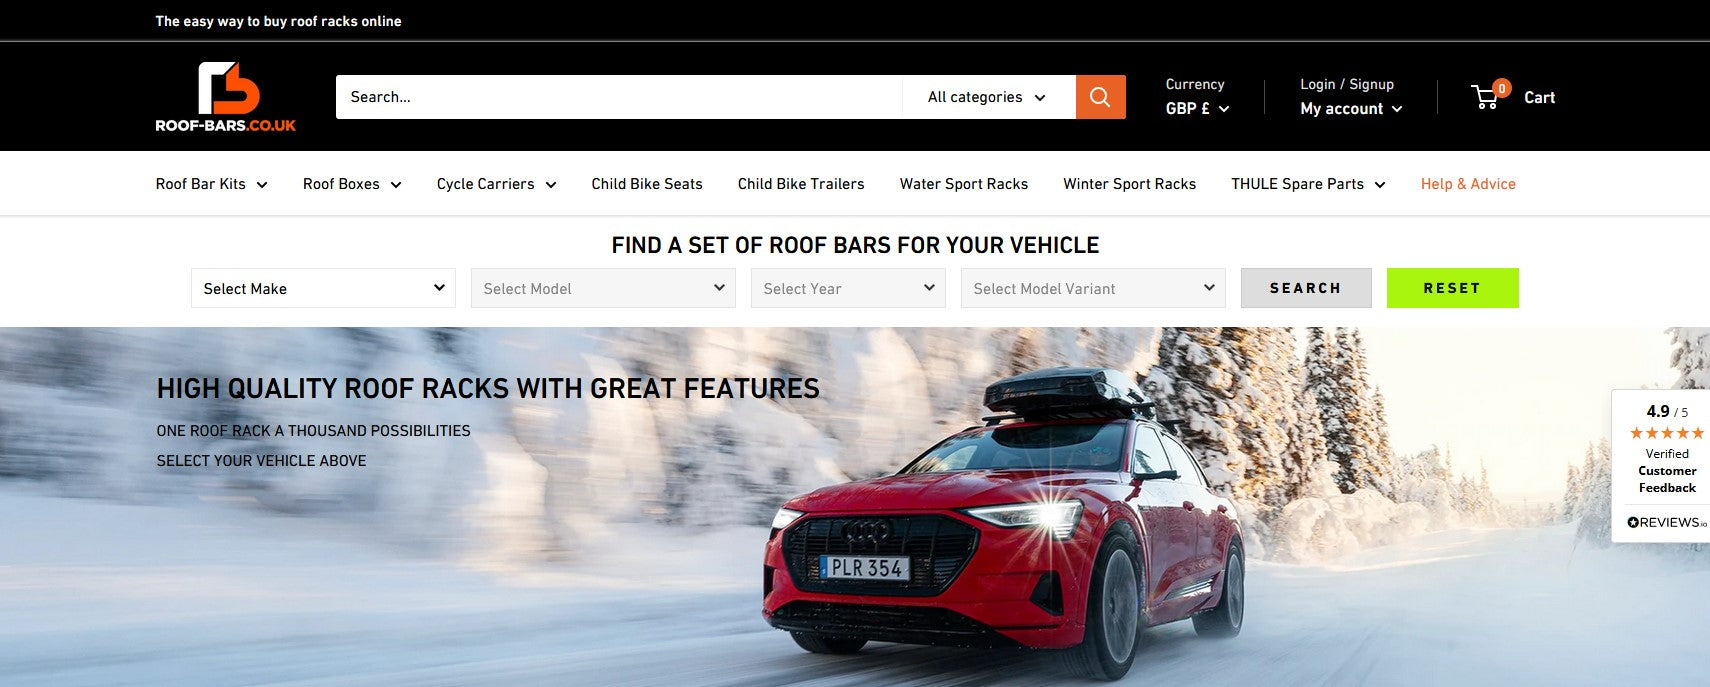 roof-bars.co.uk the easy way to but roof racks online